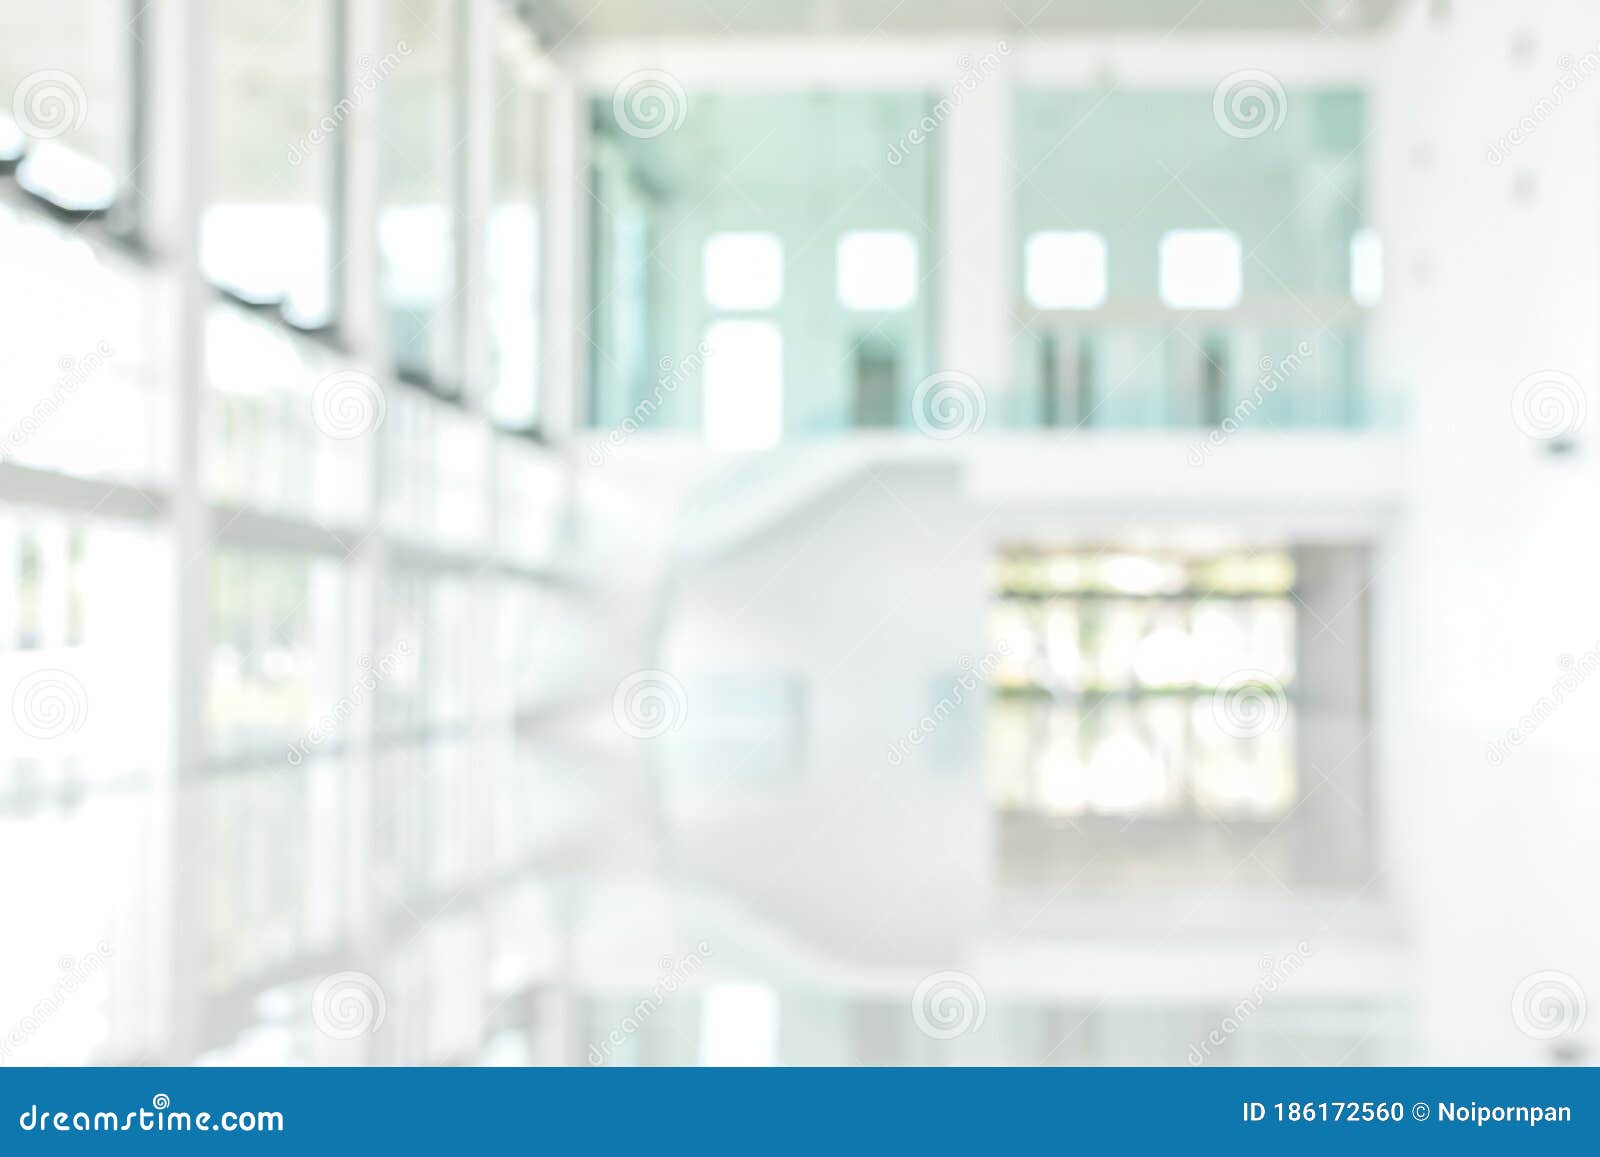 business building blur background office lobby reception hall interior or empty indoor foyer room with blurry light